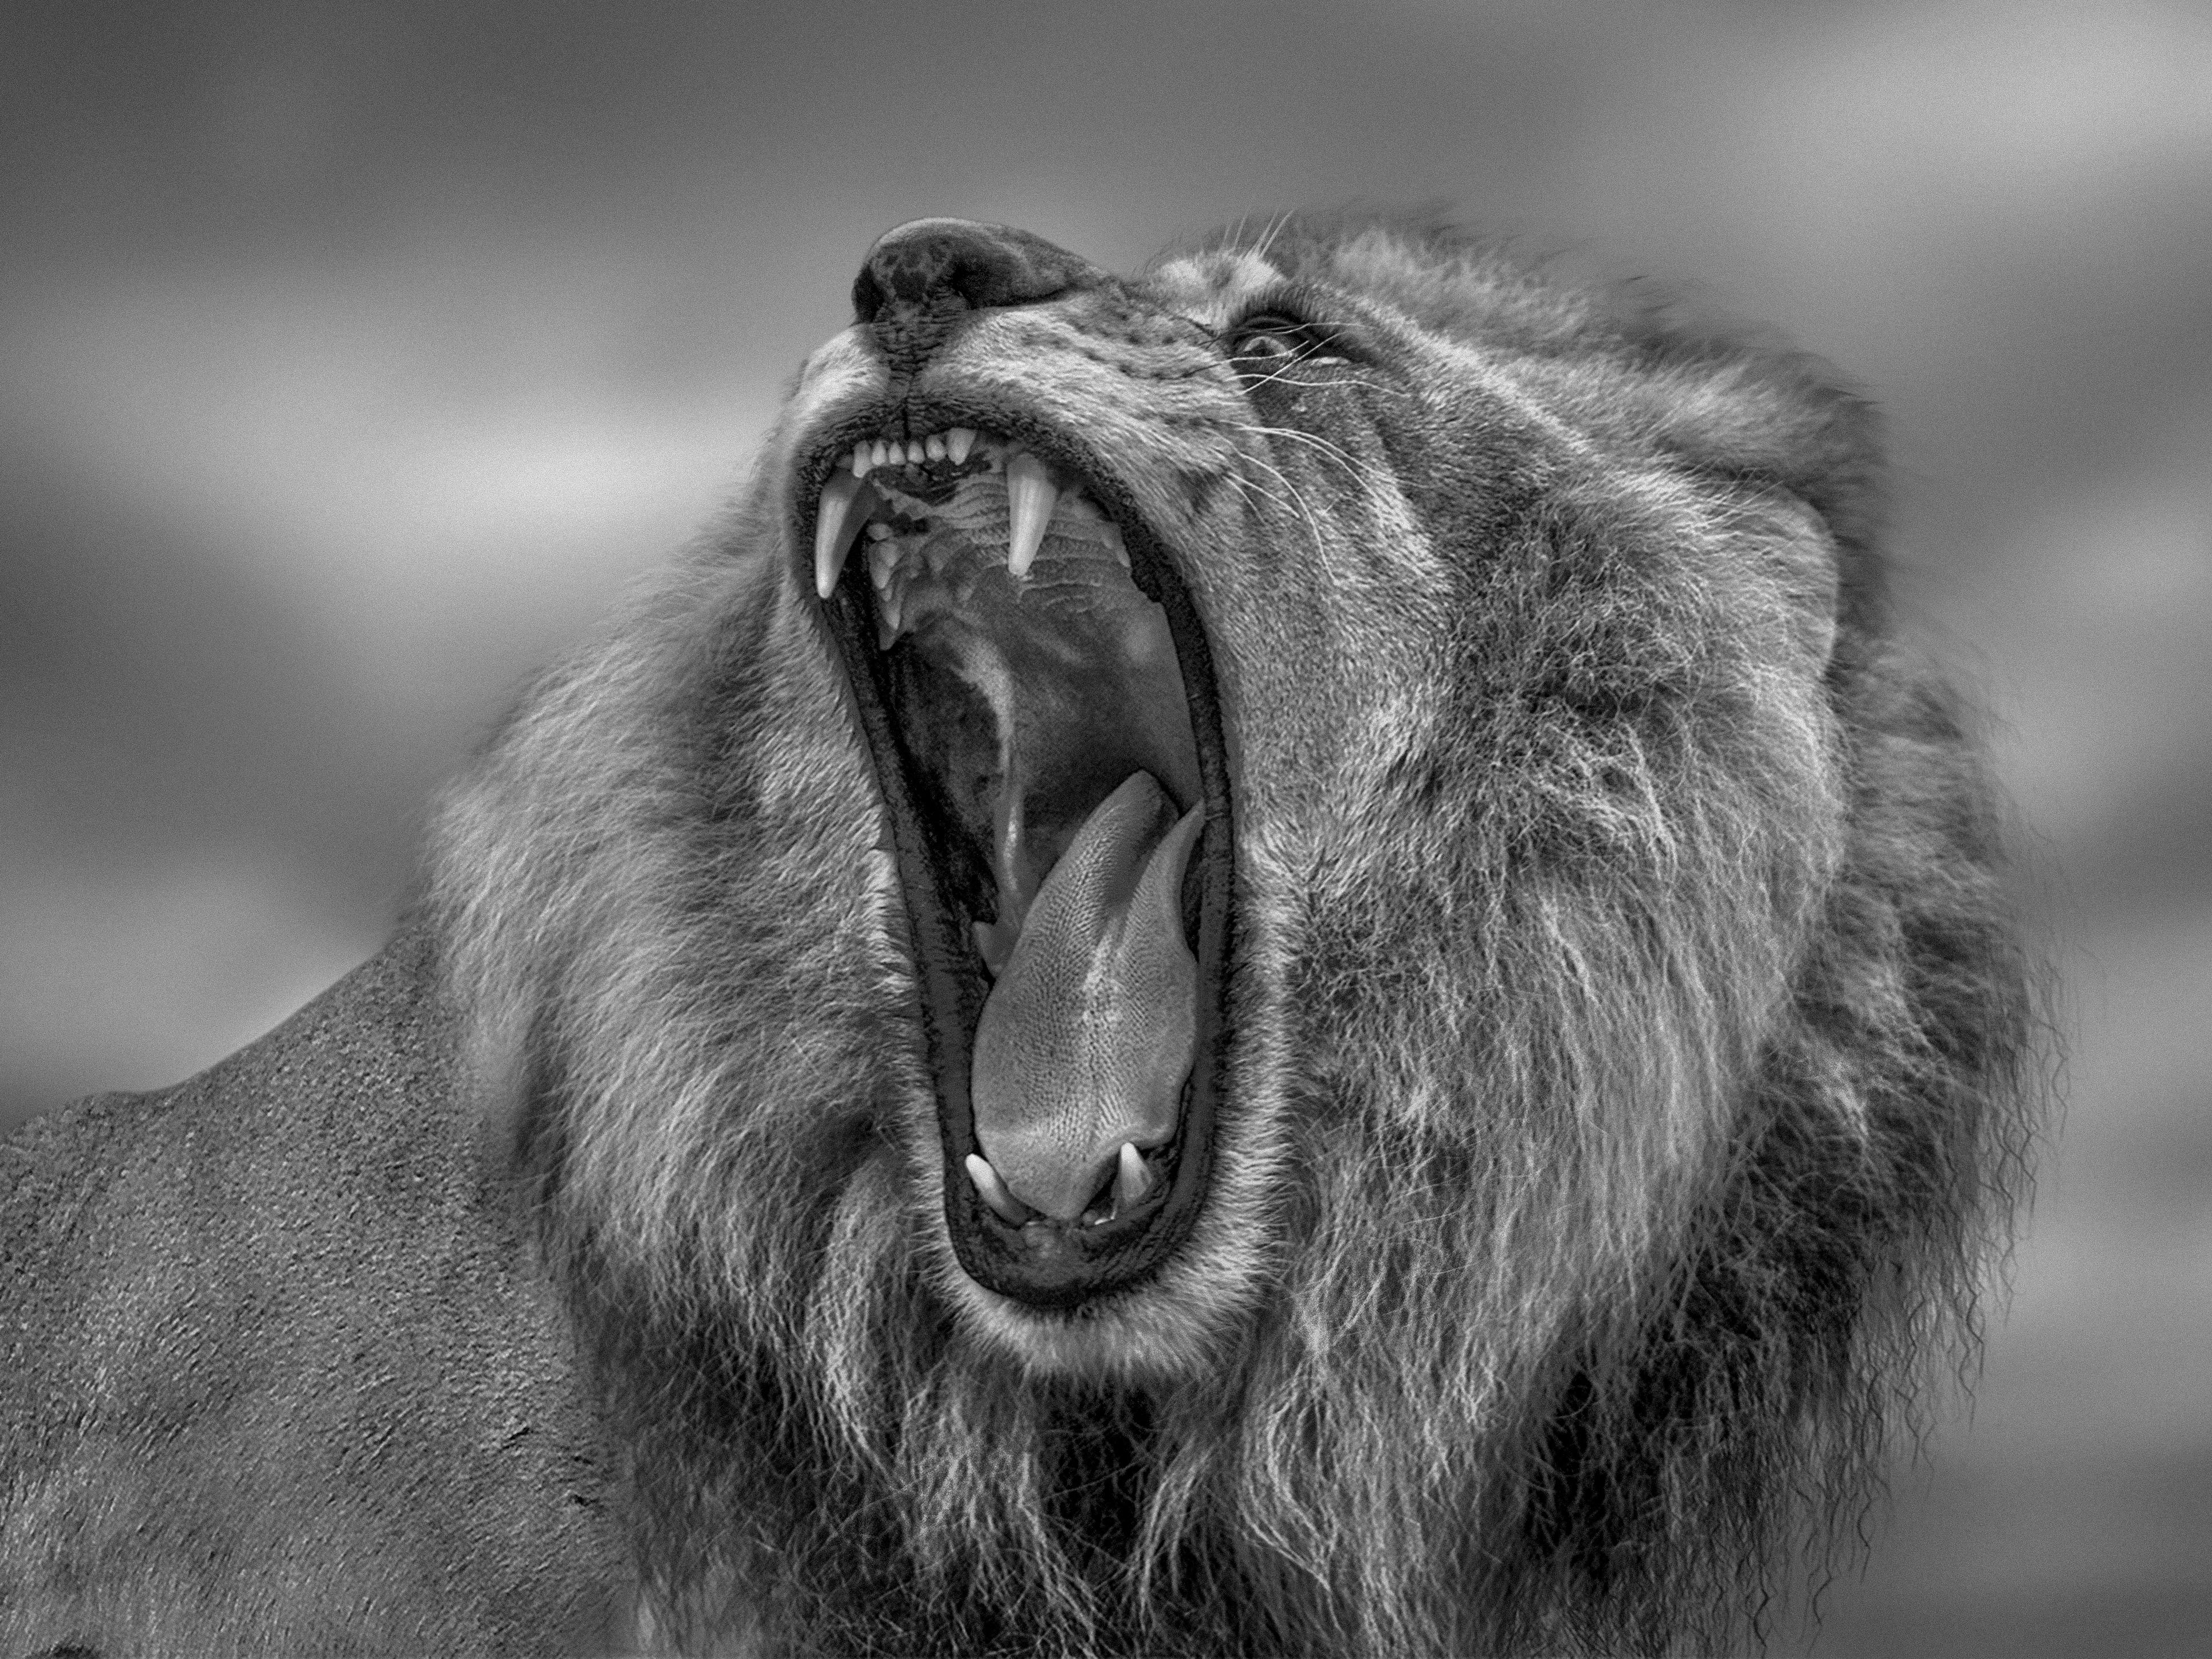 Shane Russeck Black and White Photograph - "Roar" - 36x48 Black and White Lion Photography , Africa, Lion Photograph